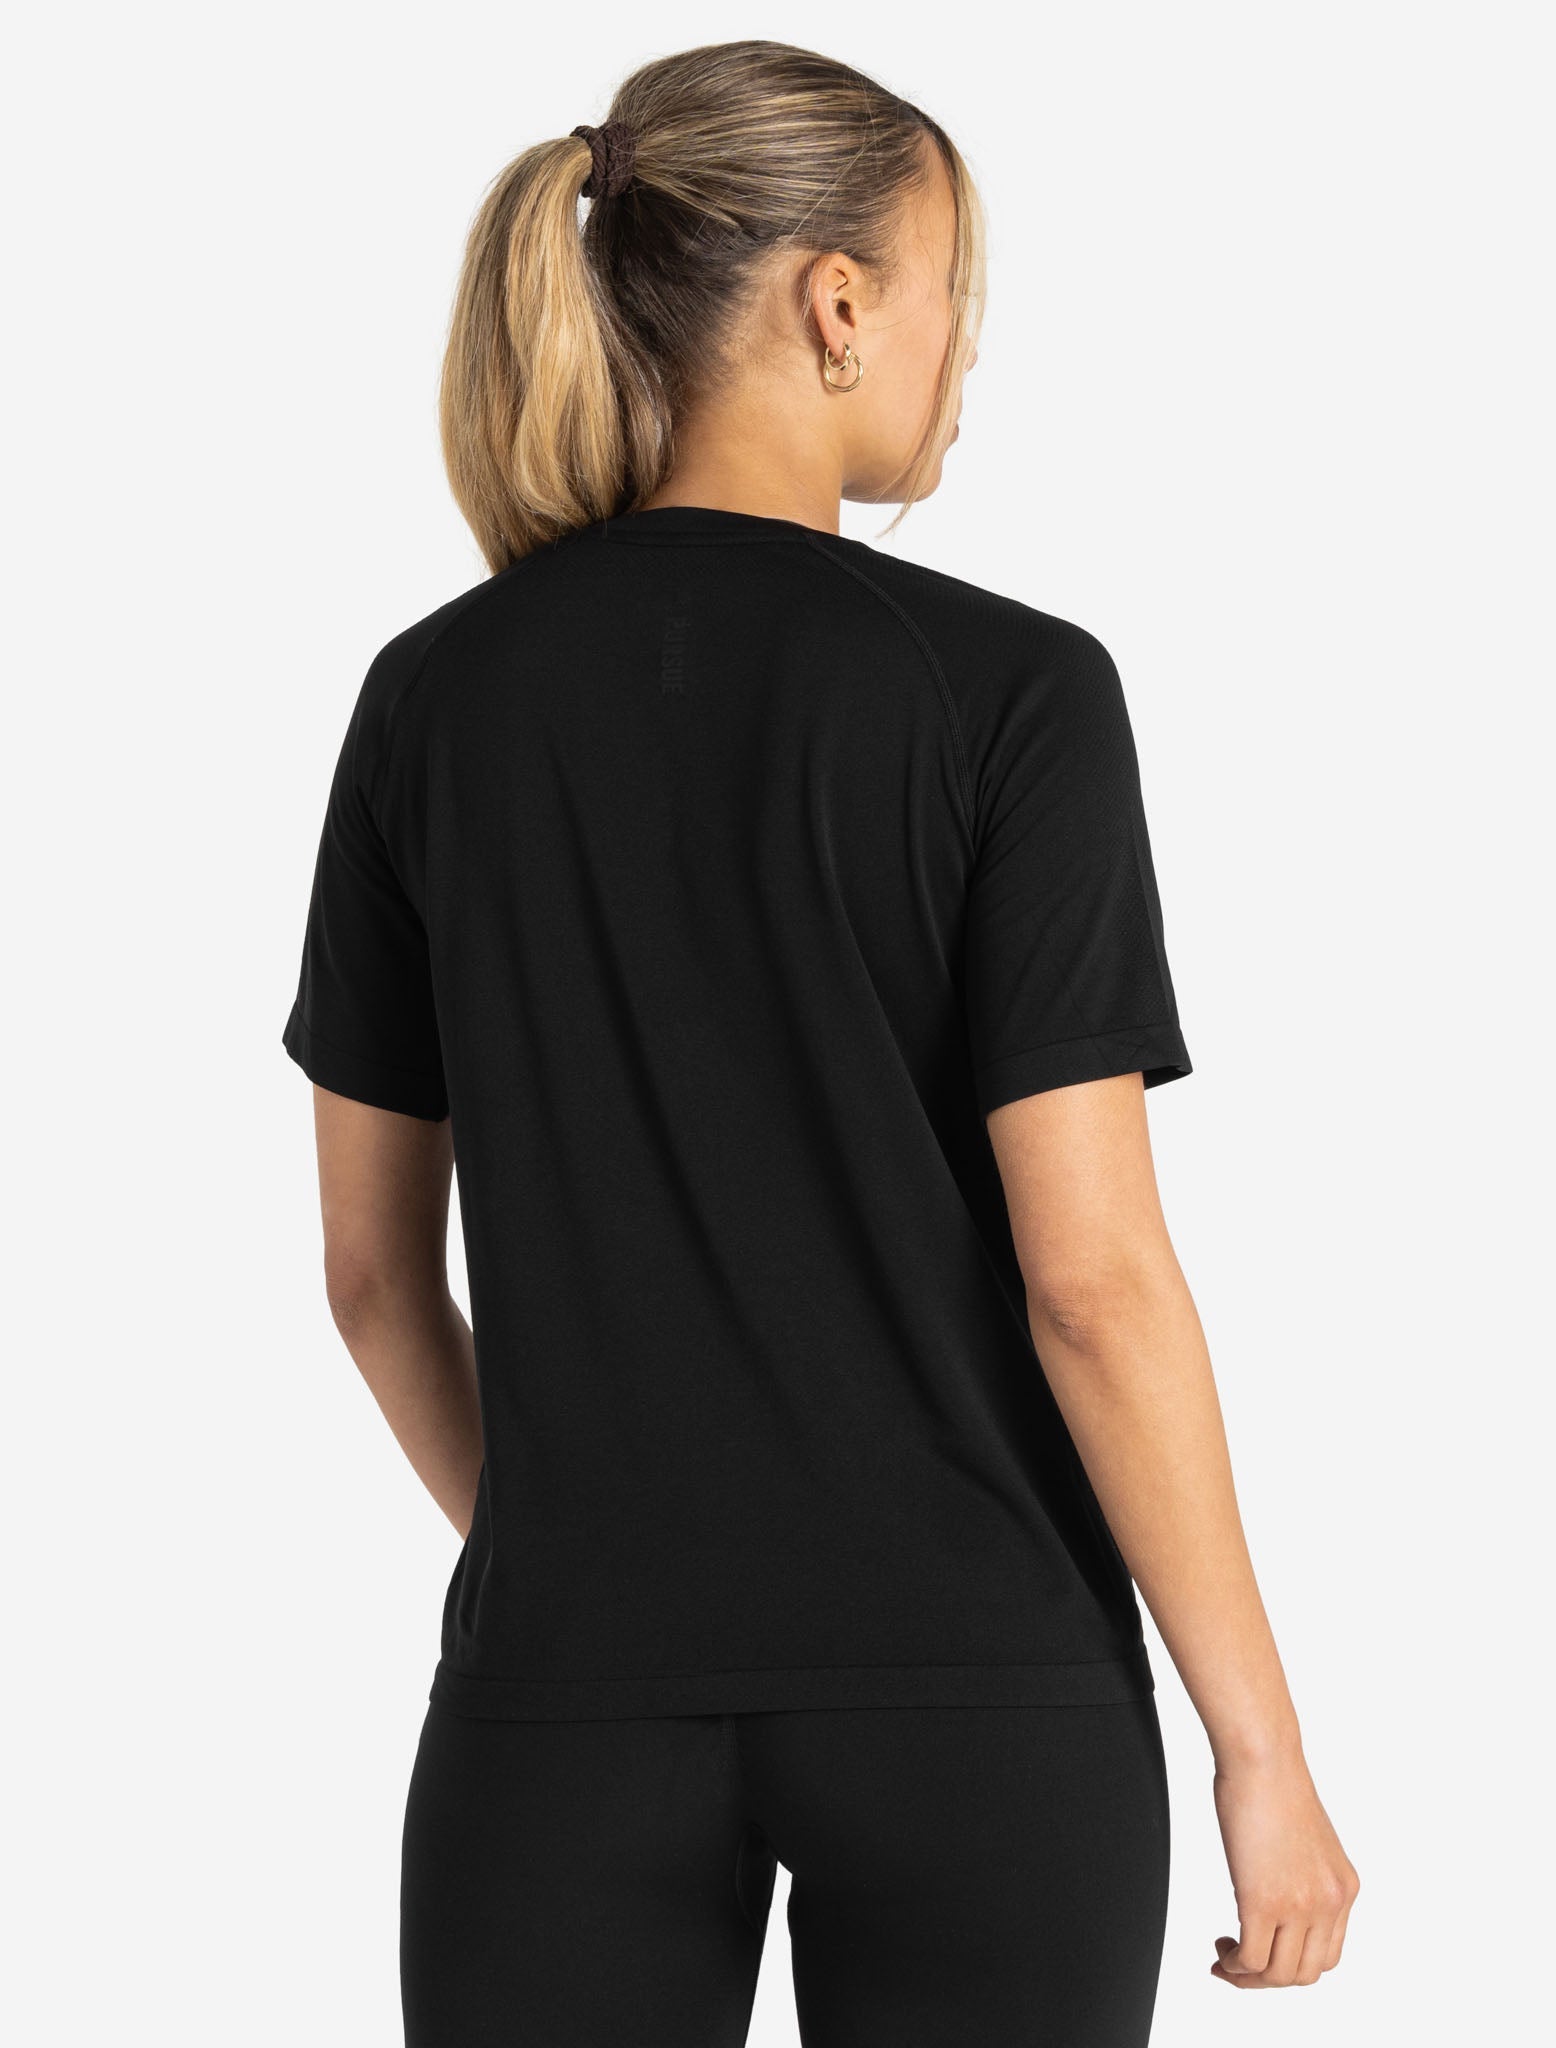 T-shirts & Gym Tops for women